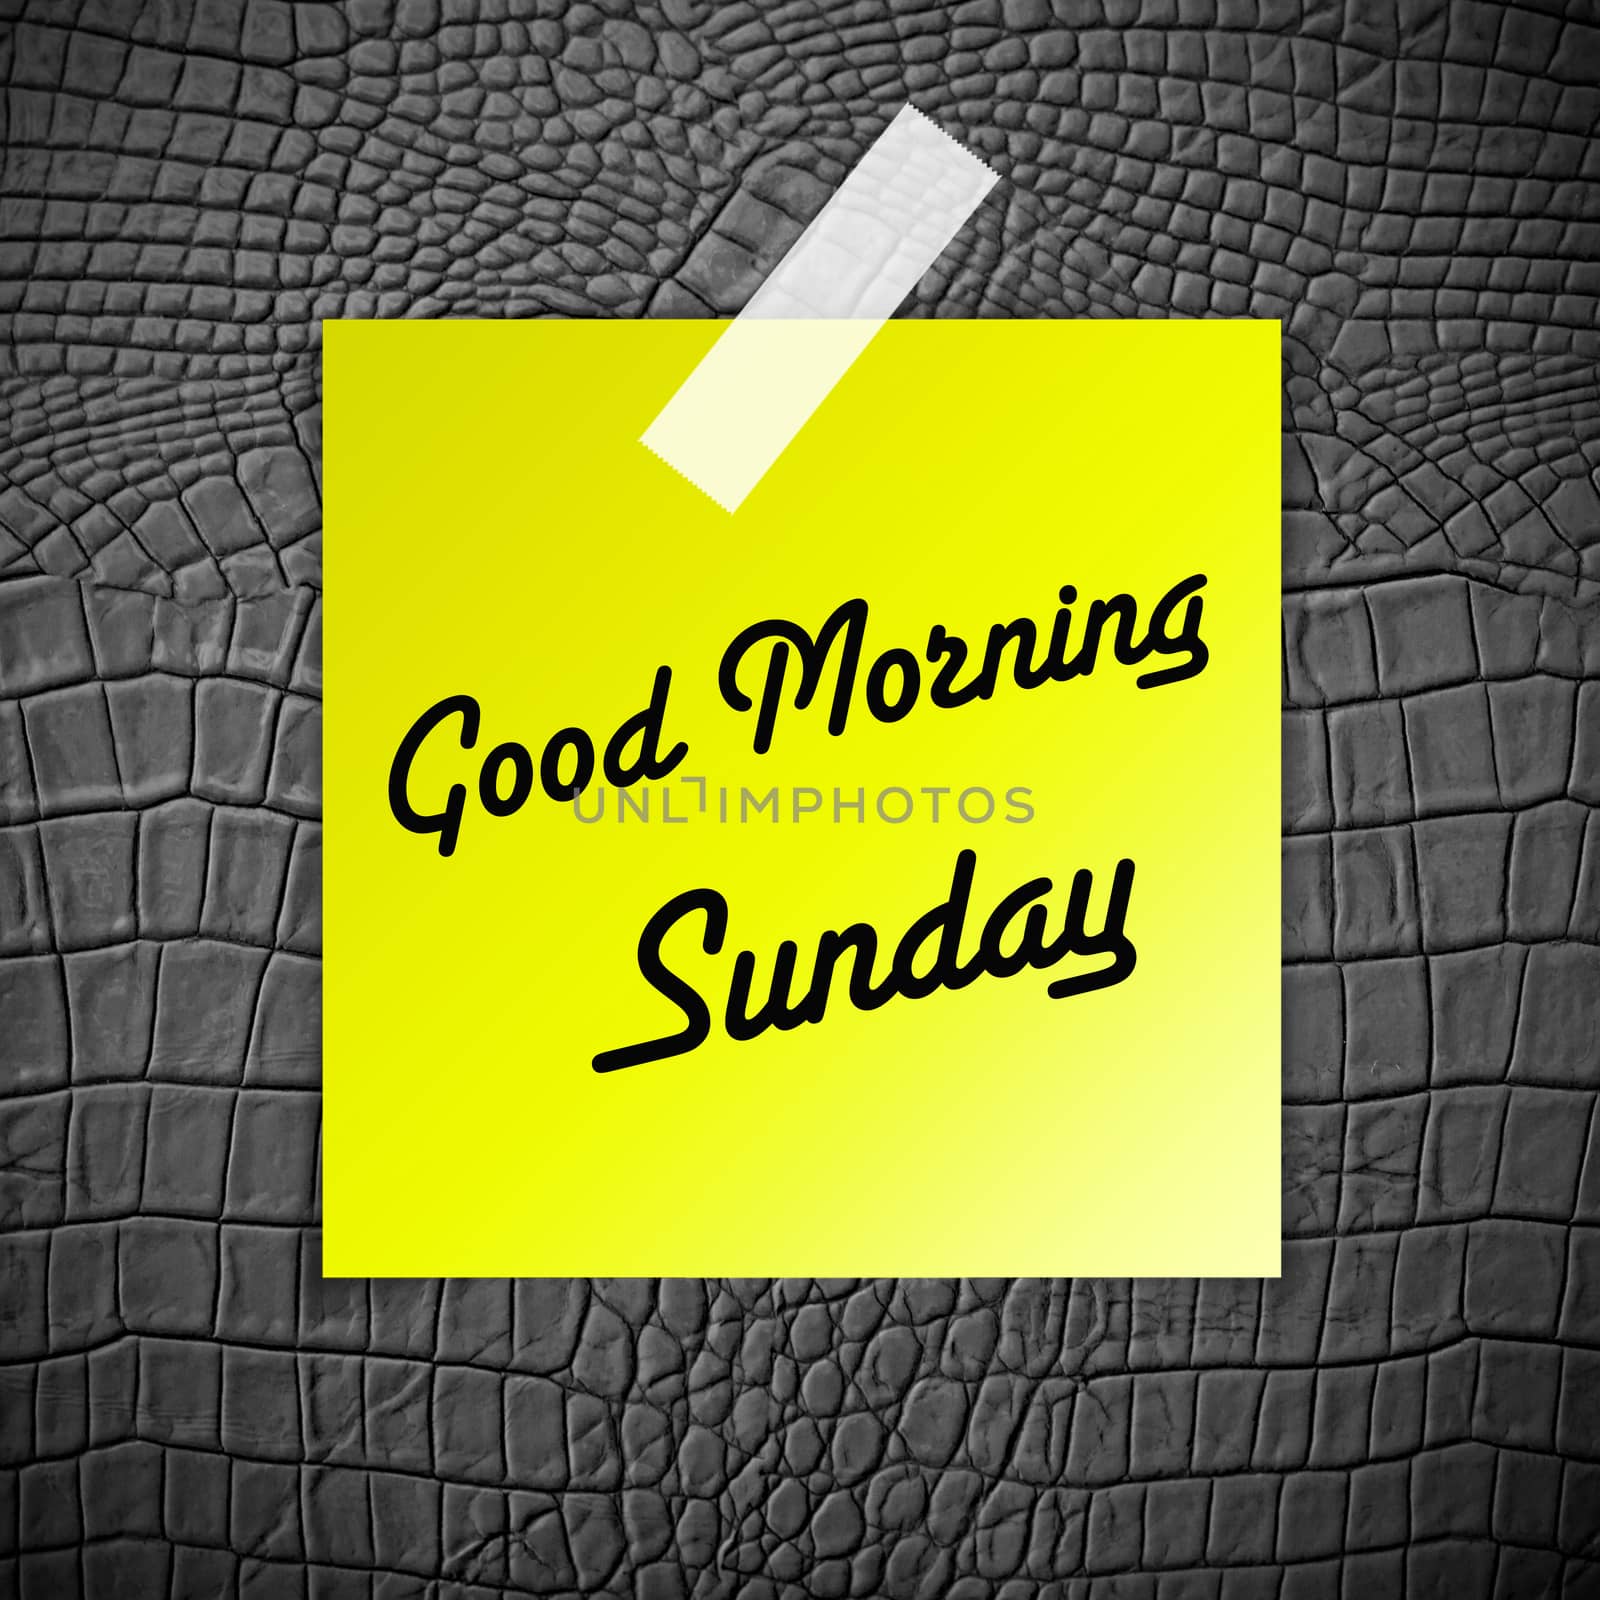 Good morning Sunday working day on Grey Leather texture background